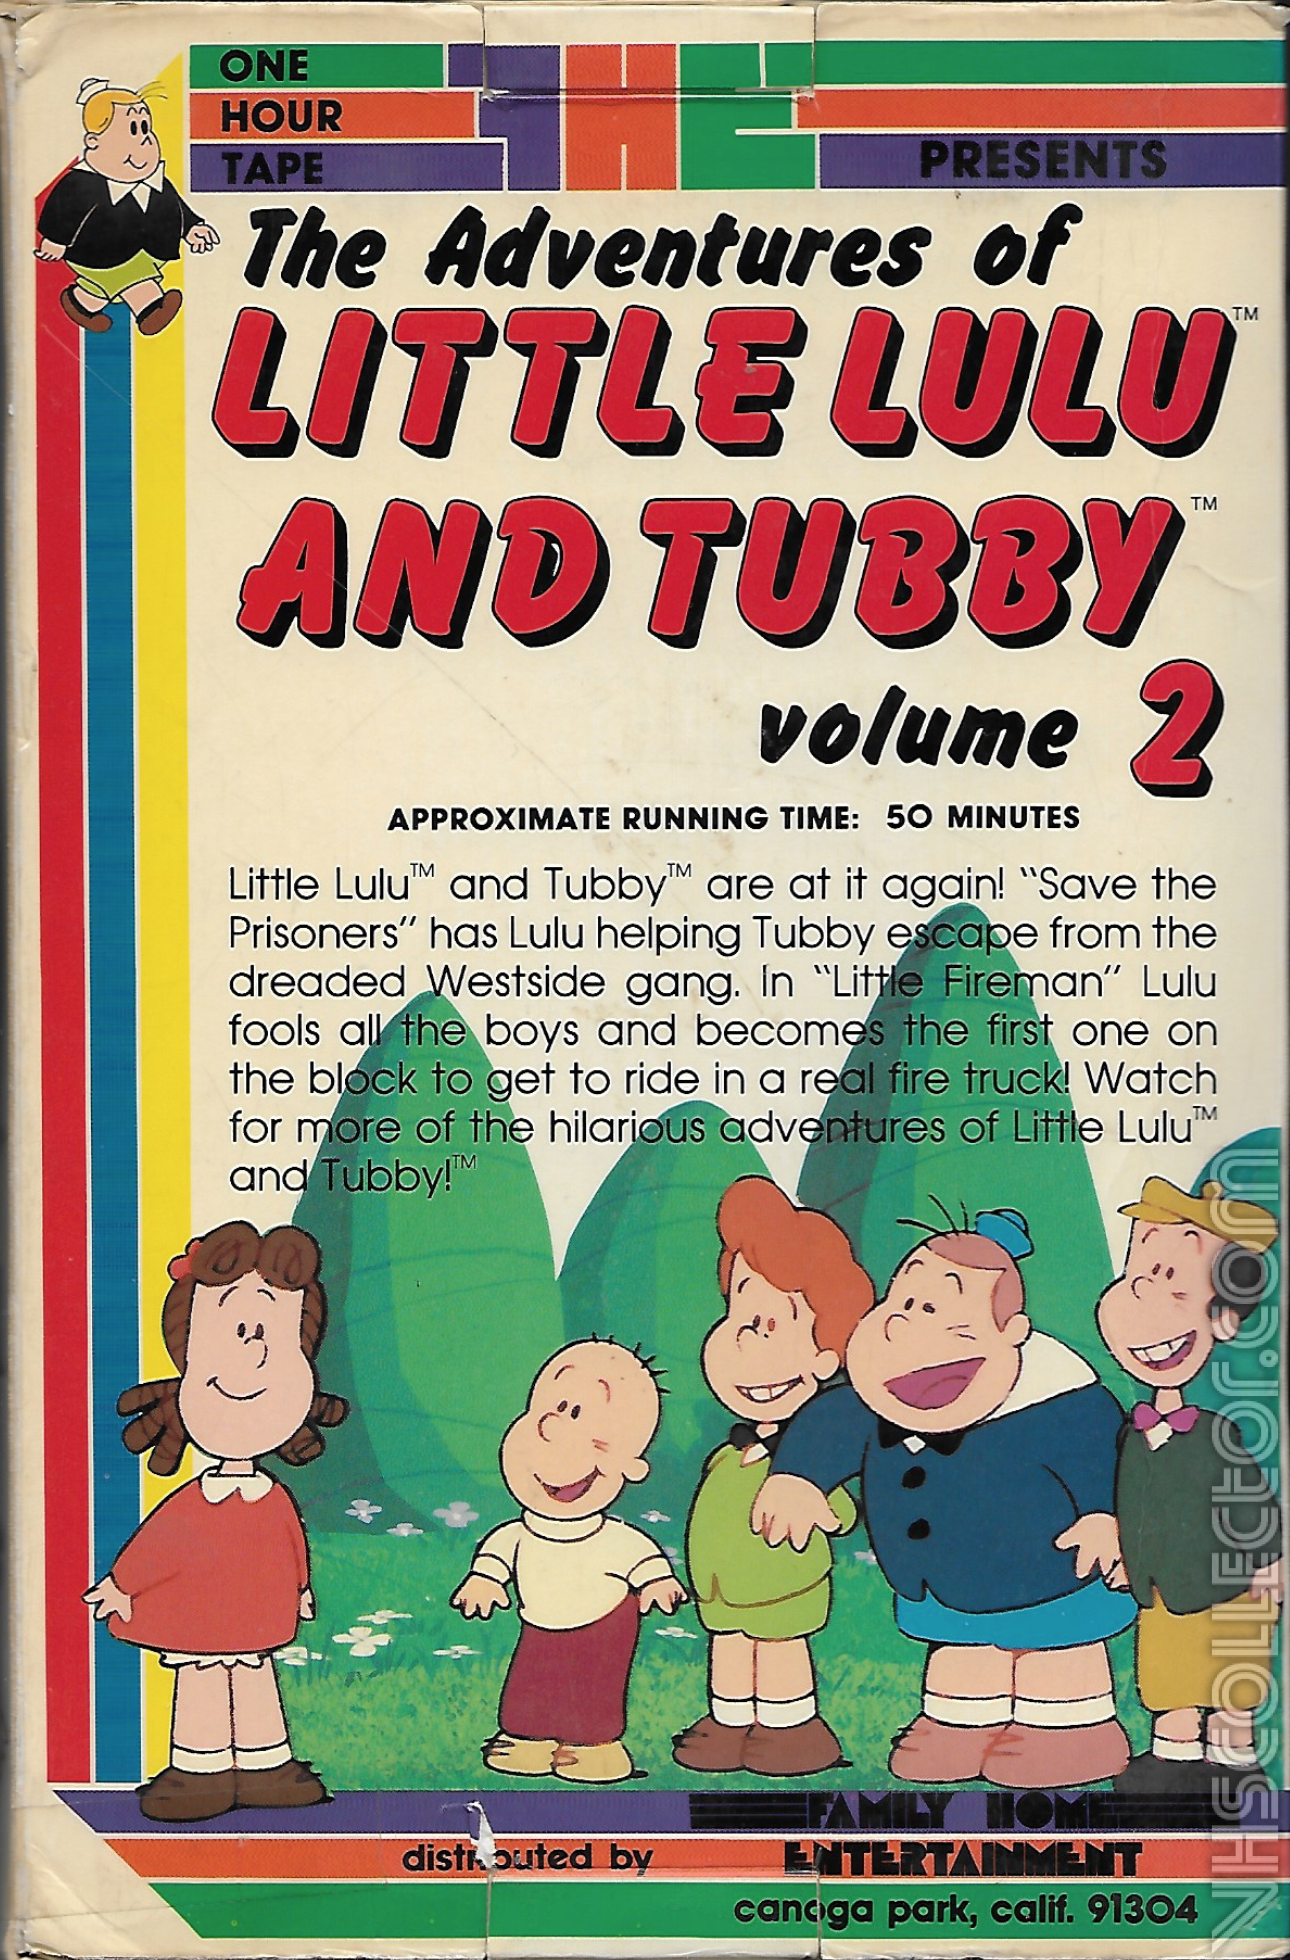 The Adventures of Little Lulu and Tubby: Volume 2 | VHSCollector.com